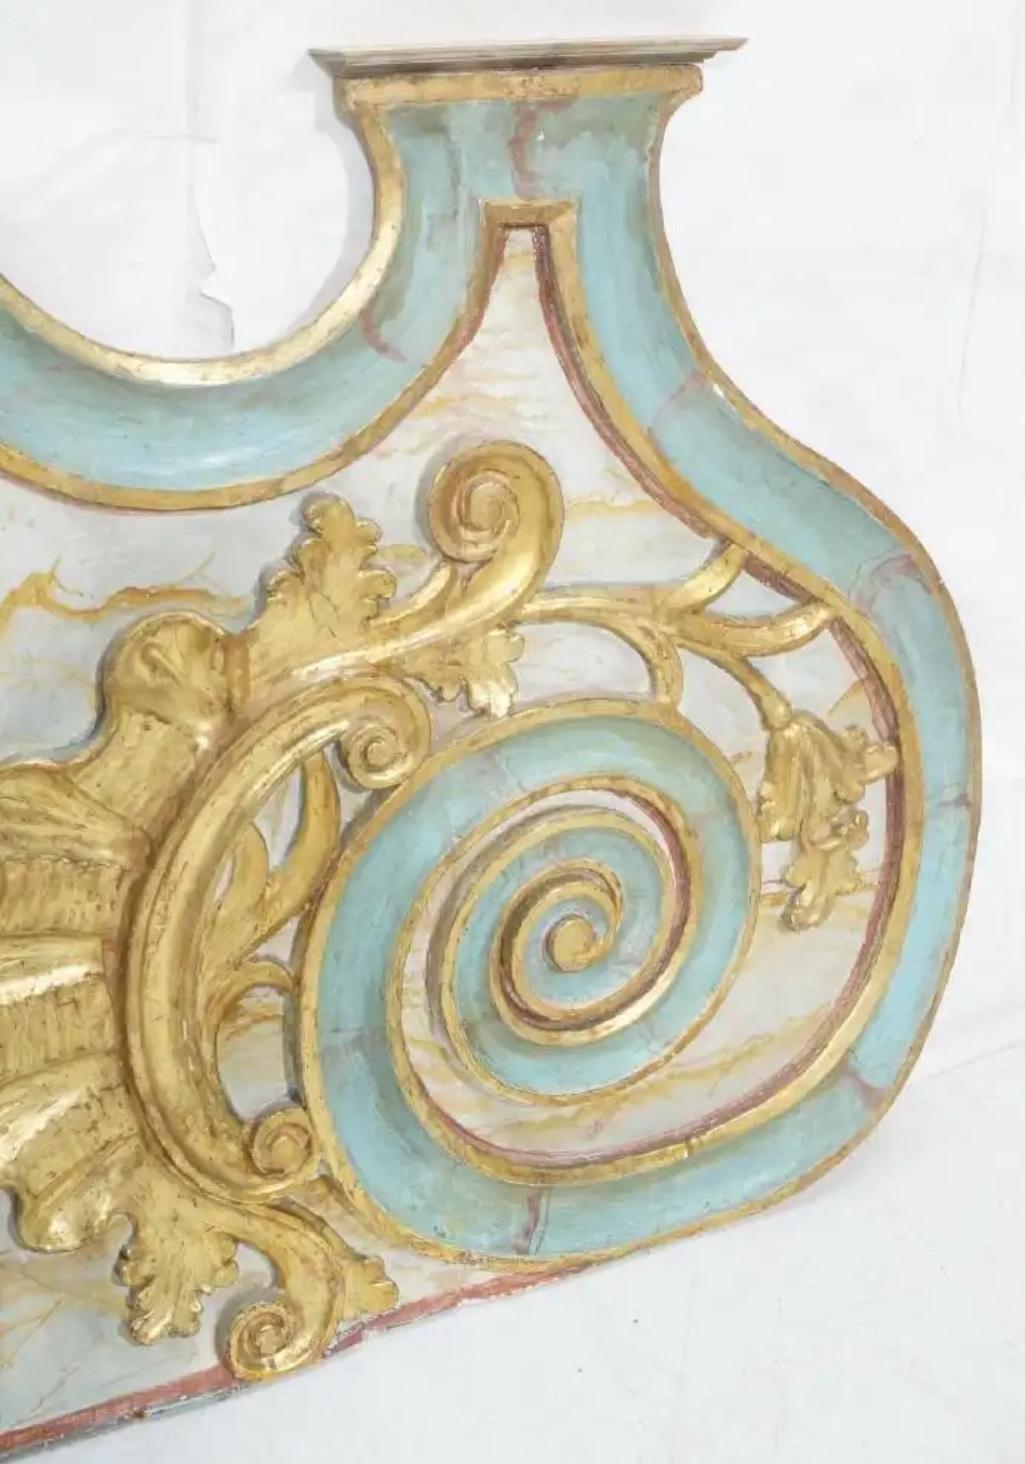 Large polychrome gilt gesso carved wood double architectural panel with decorative scroll details, carved shell and leaf design with raised molded faux marble moldings in an antiqued turquoise blue with faux marble background in creams and golds.